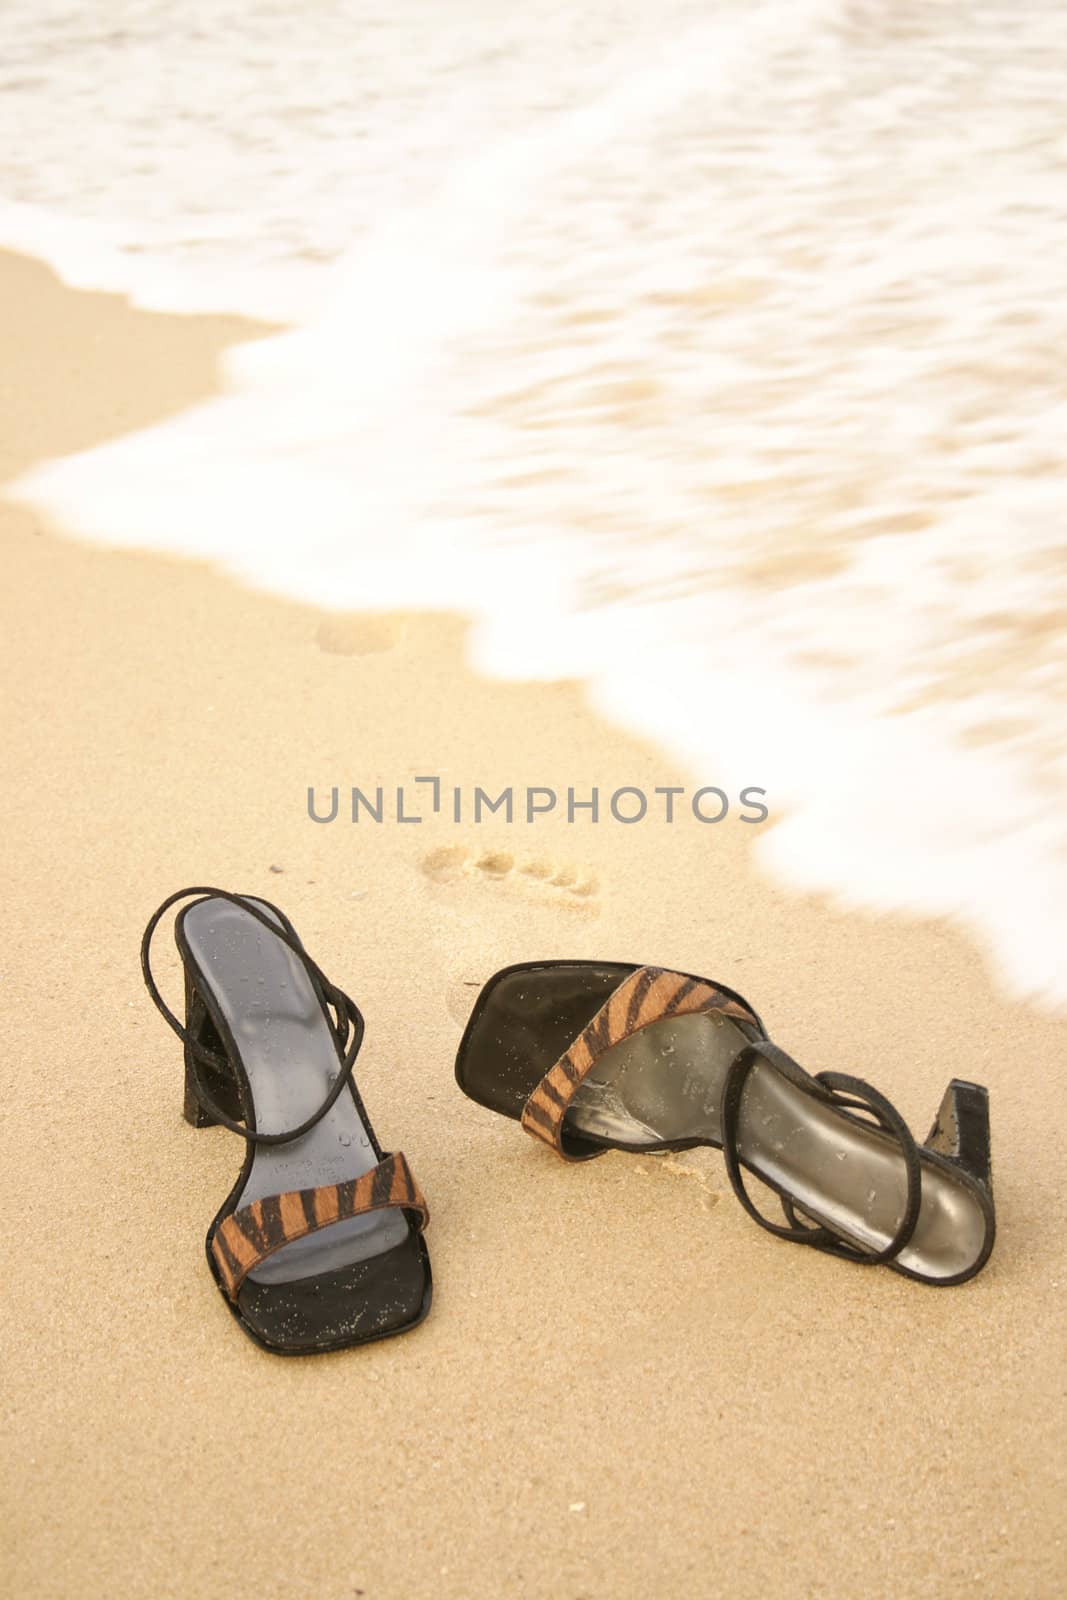 Sandals sitting on the sand as water laps close by.  Maroubra Beach East Sydney dusk light 